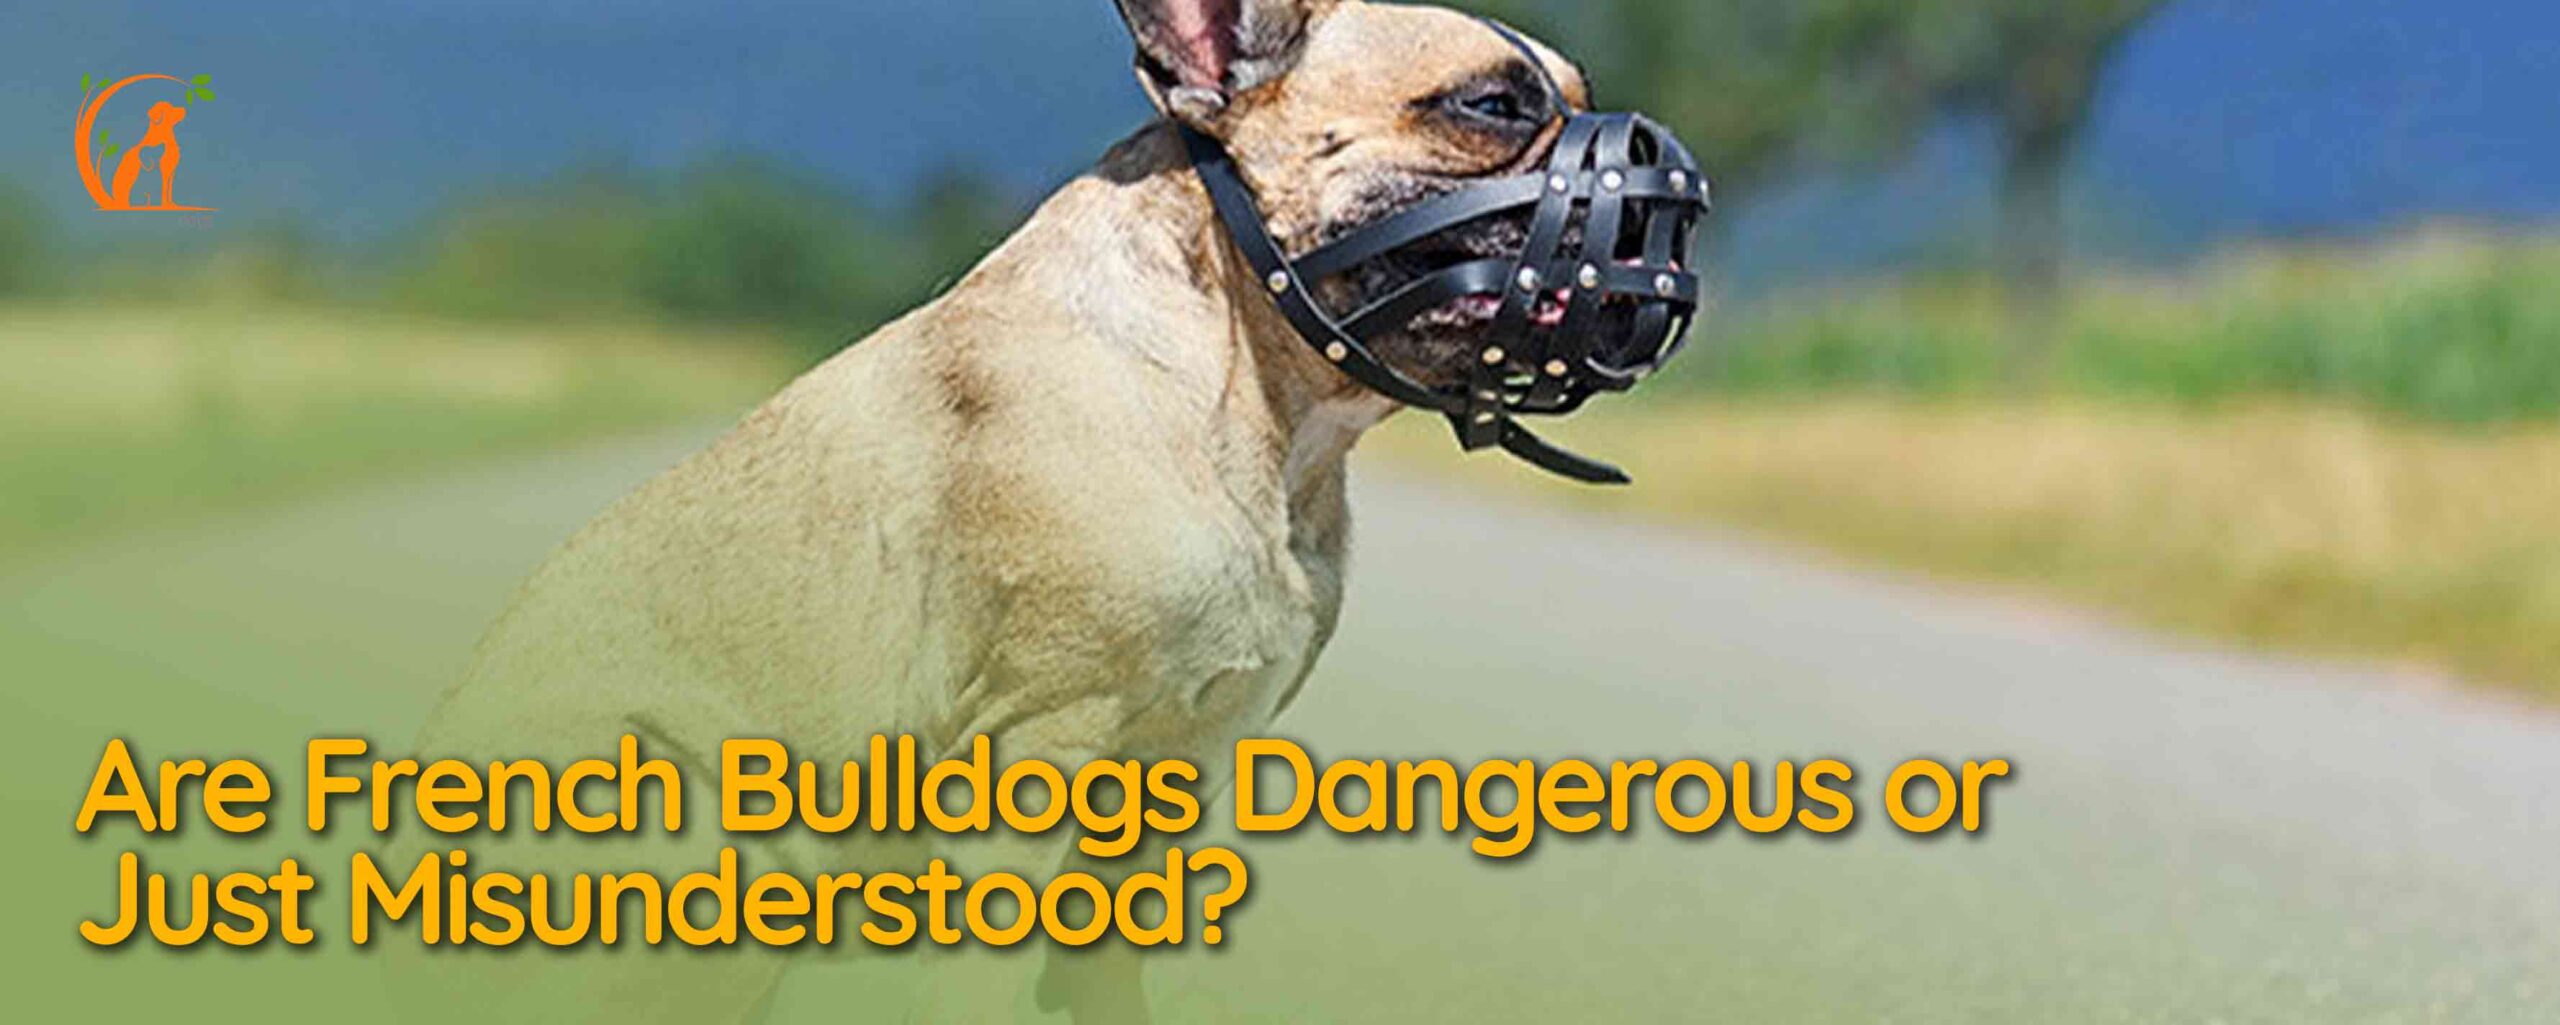 Are French Bulldogs Dangerous